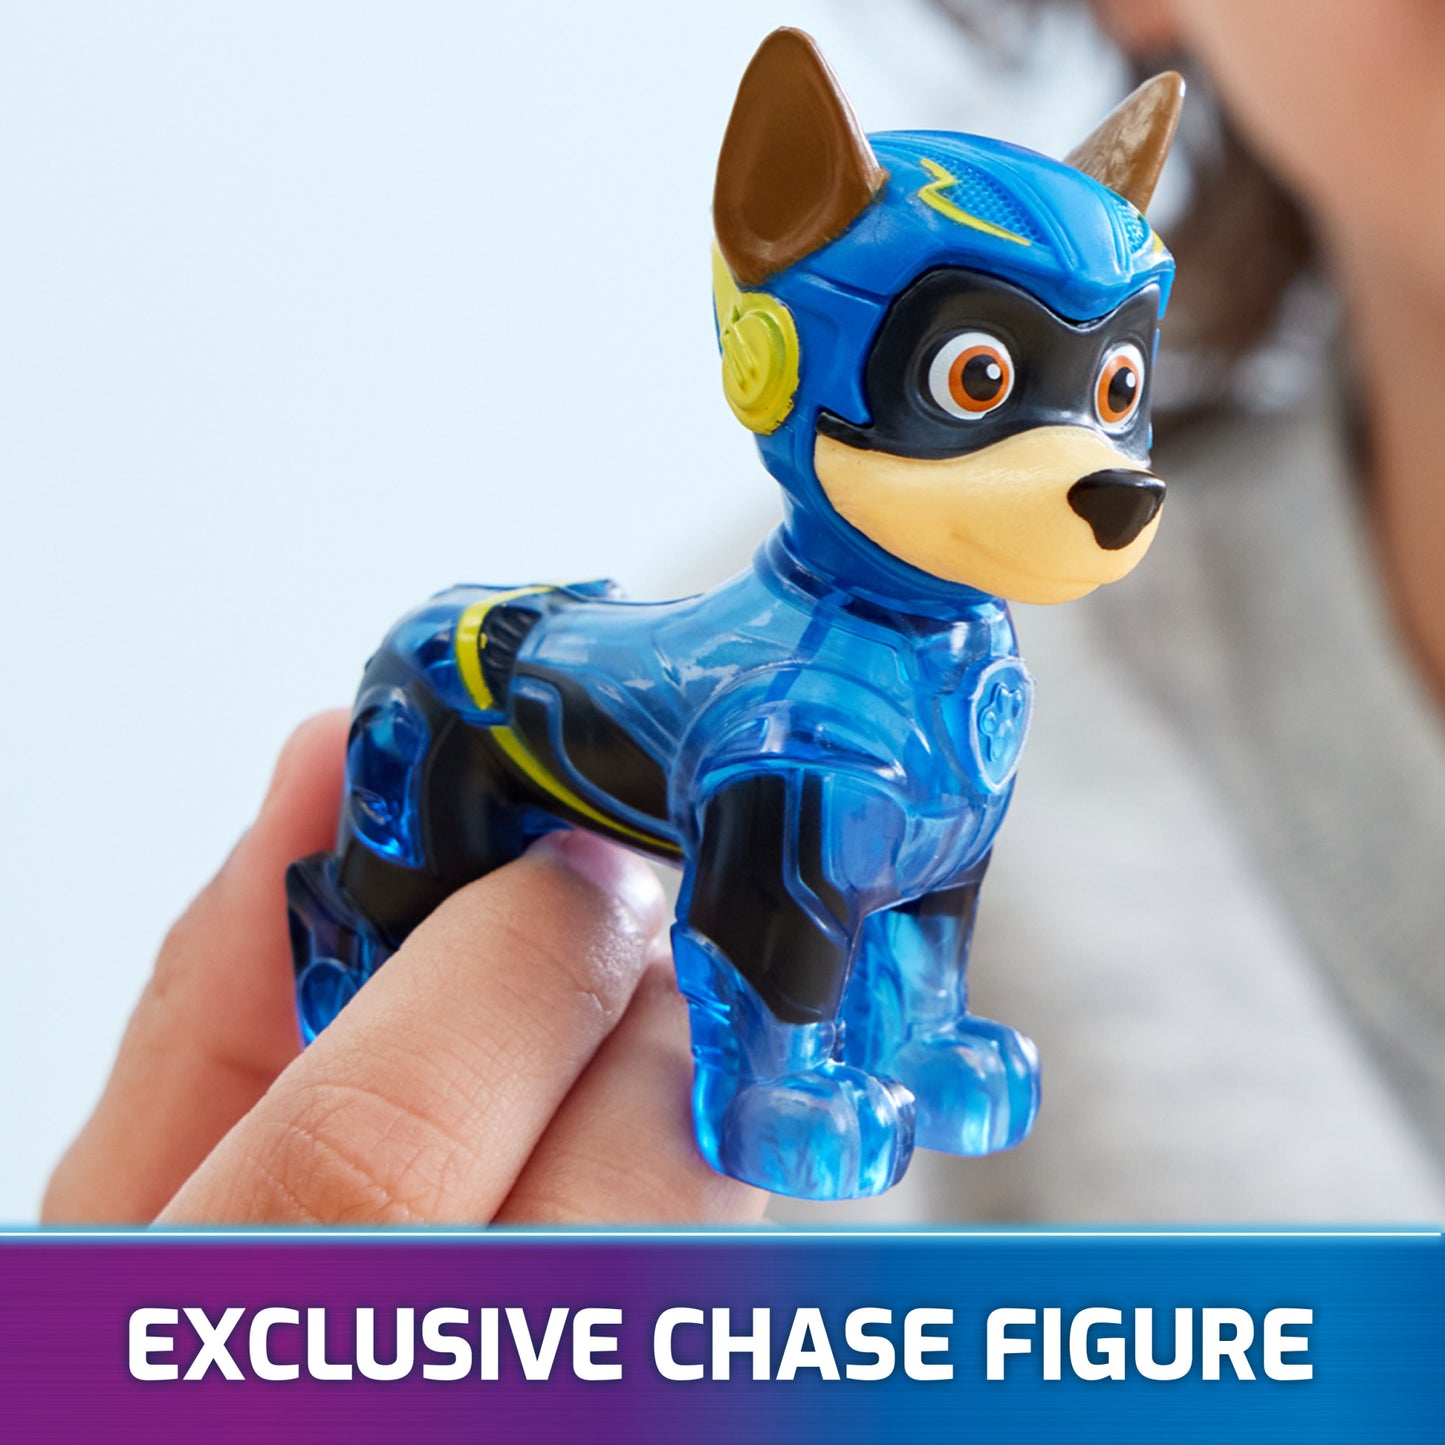 Paw Patrol: The Mighty Movie, Chase’s Mighty Transforming Cruiser with Mighty Pups Action Figure, Lights and Sounds, Kids Toys for Boys & Girls 3+